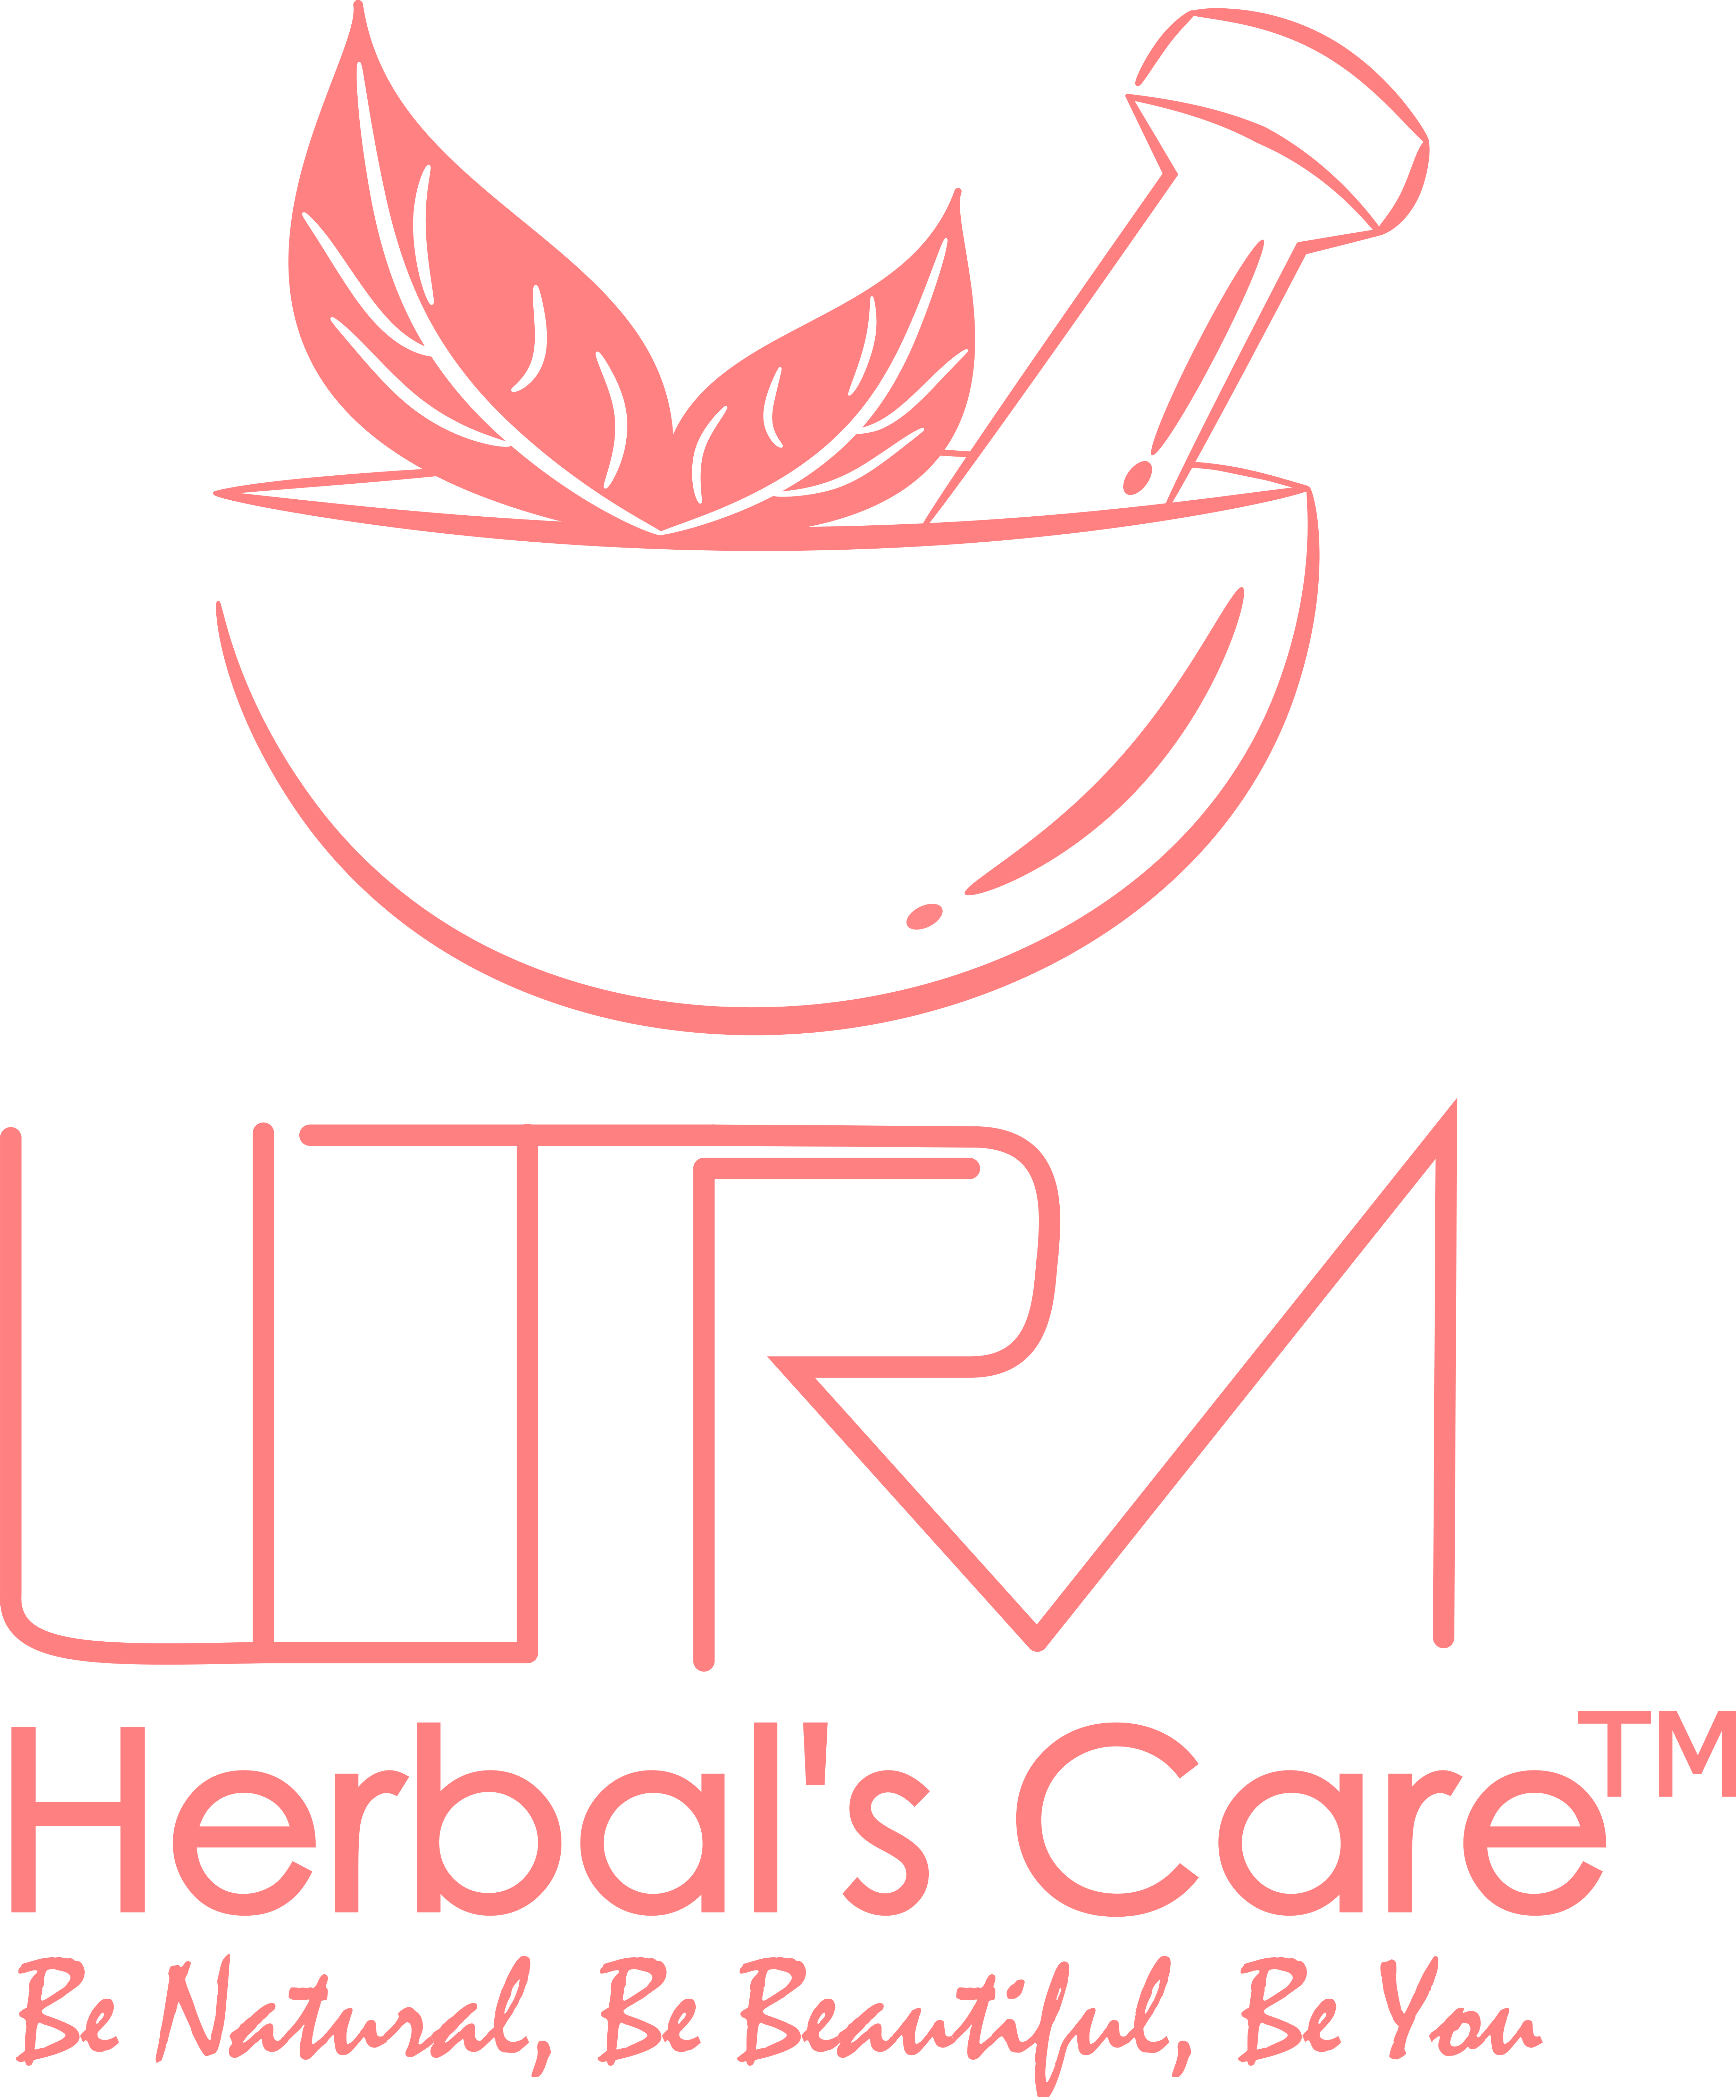 Business logo of ULTRA HERBALS CARE